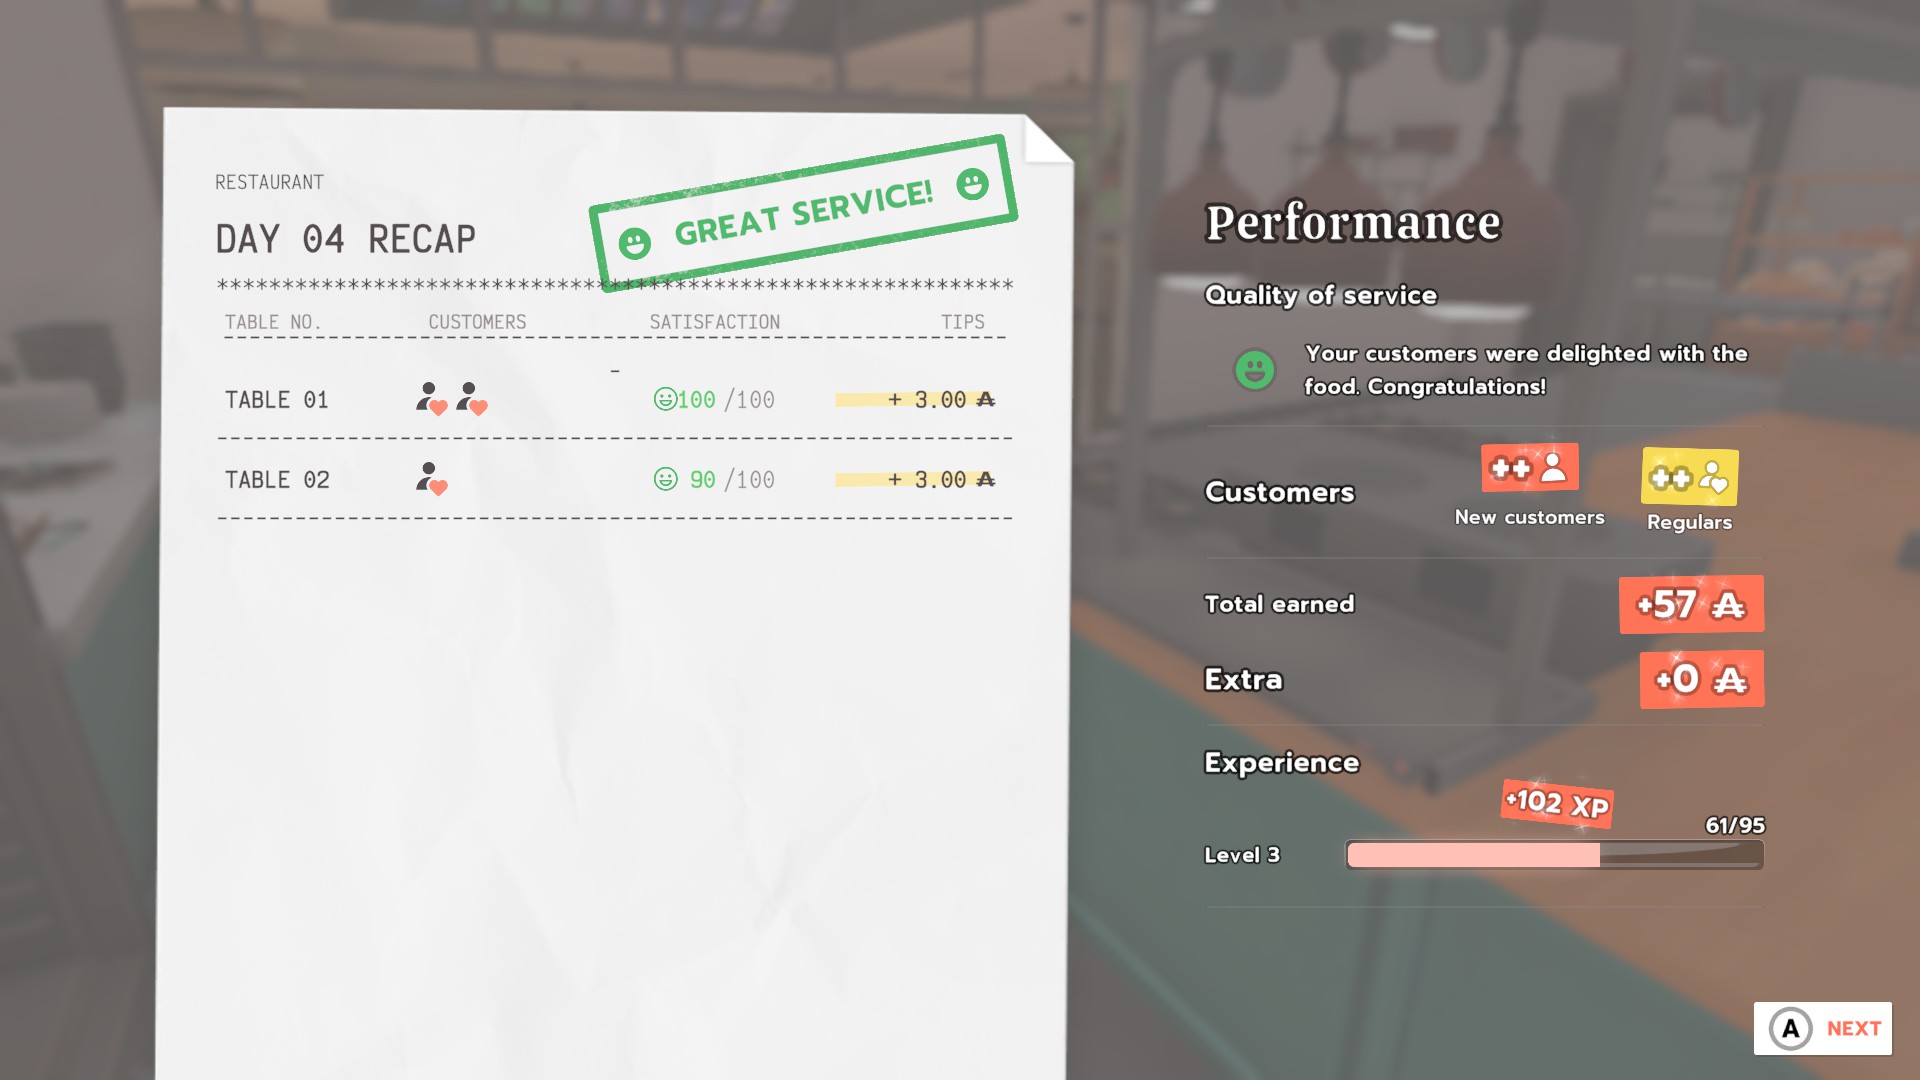 your day 4 restaurant recap showing overall scores as well as specific tables. Image shows their satisfaction as well as the amount of tip given. On the right there is the performance overview, with quality of service, customers as well as total amount of money earned. Then it shows your experience bar which shows your current level.